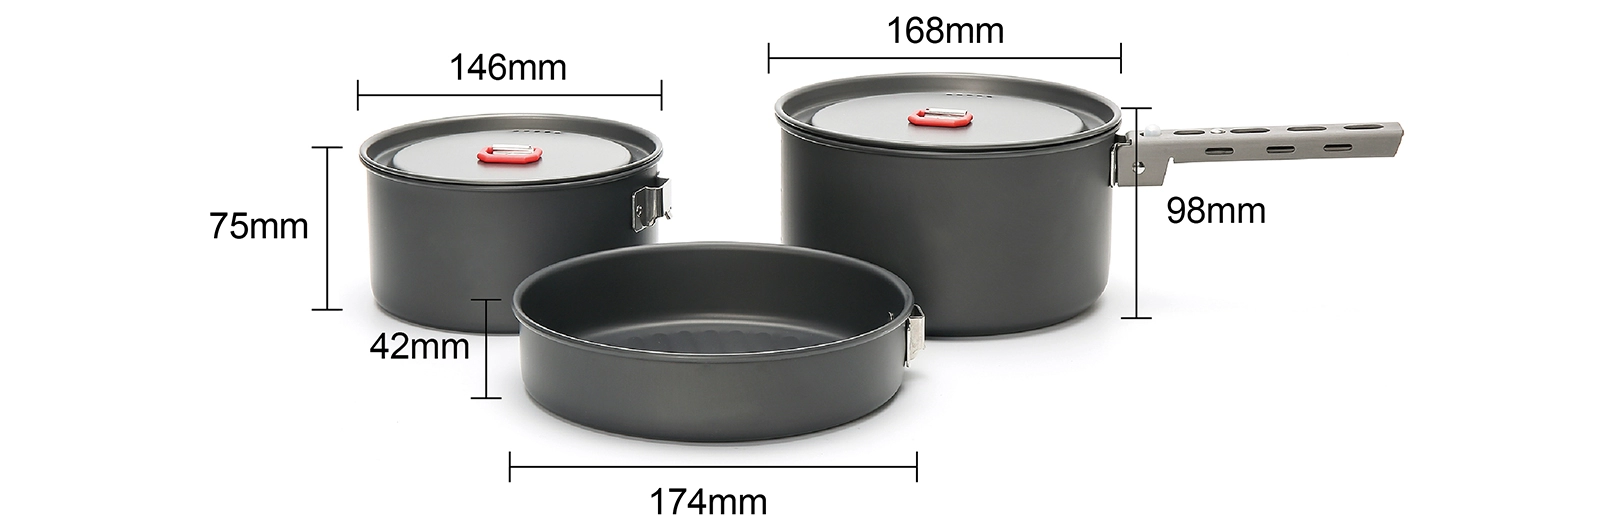 details of Compact Removable Handle Cook Set for Backpacking